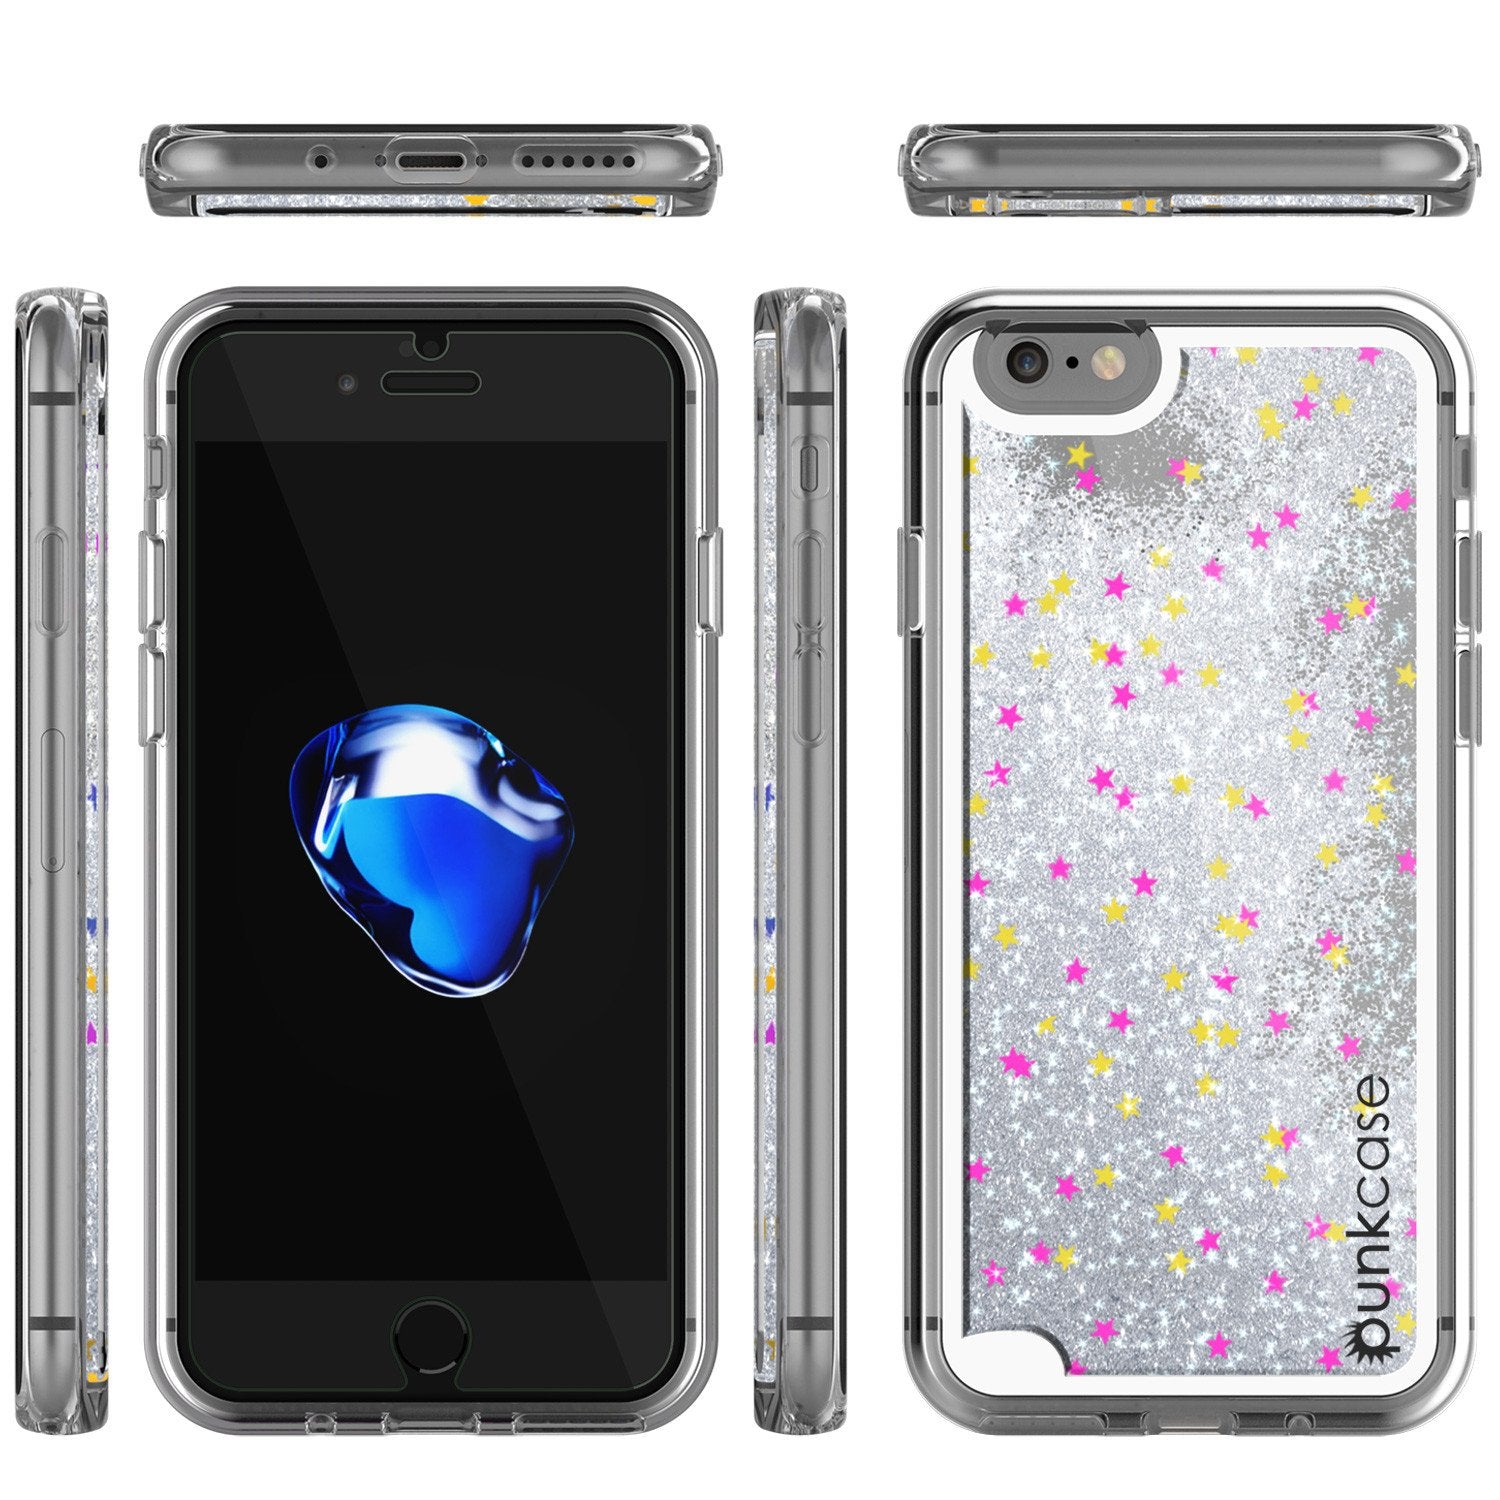 iPhone 7 Case, PunkCase LIQUID Silver Series, Protective Dual Layer Floating Glitter Cover